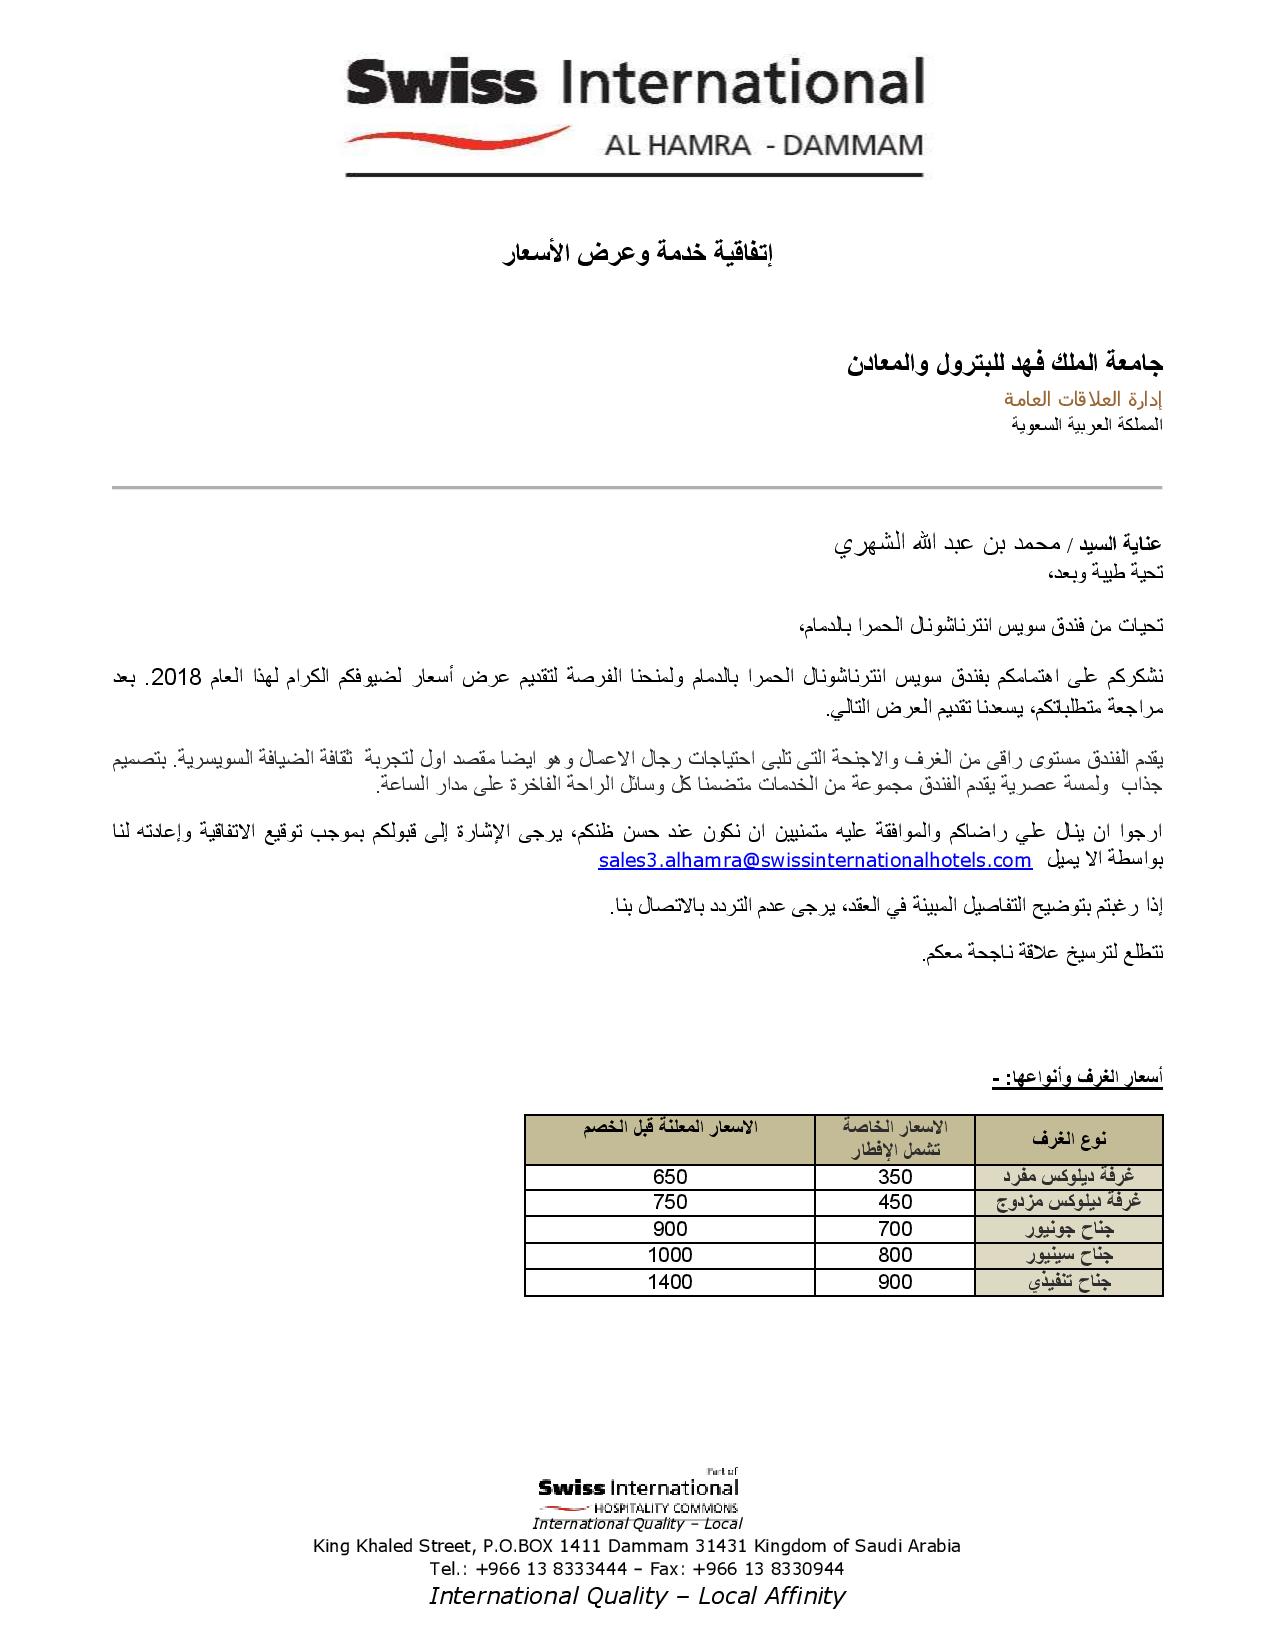 offers - king fahd university of petroleum and minerals